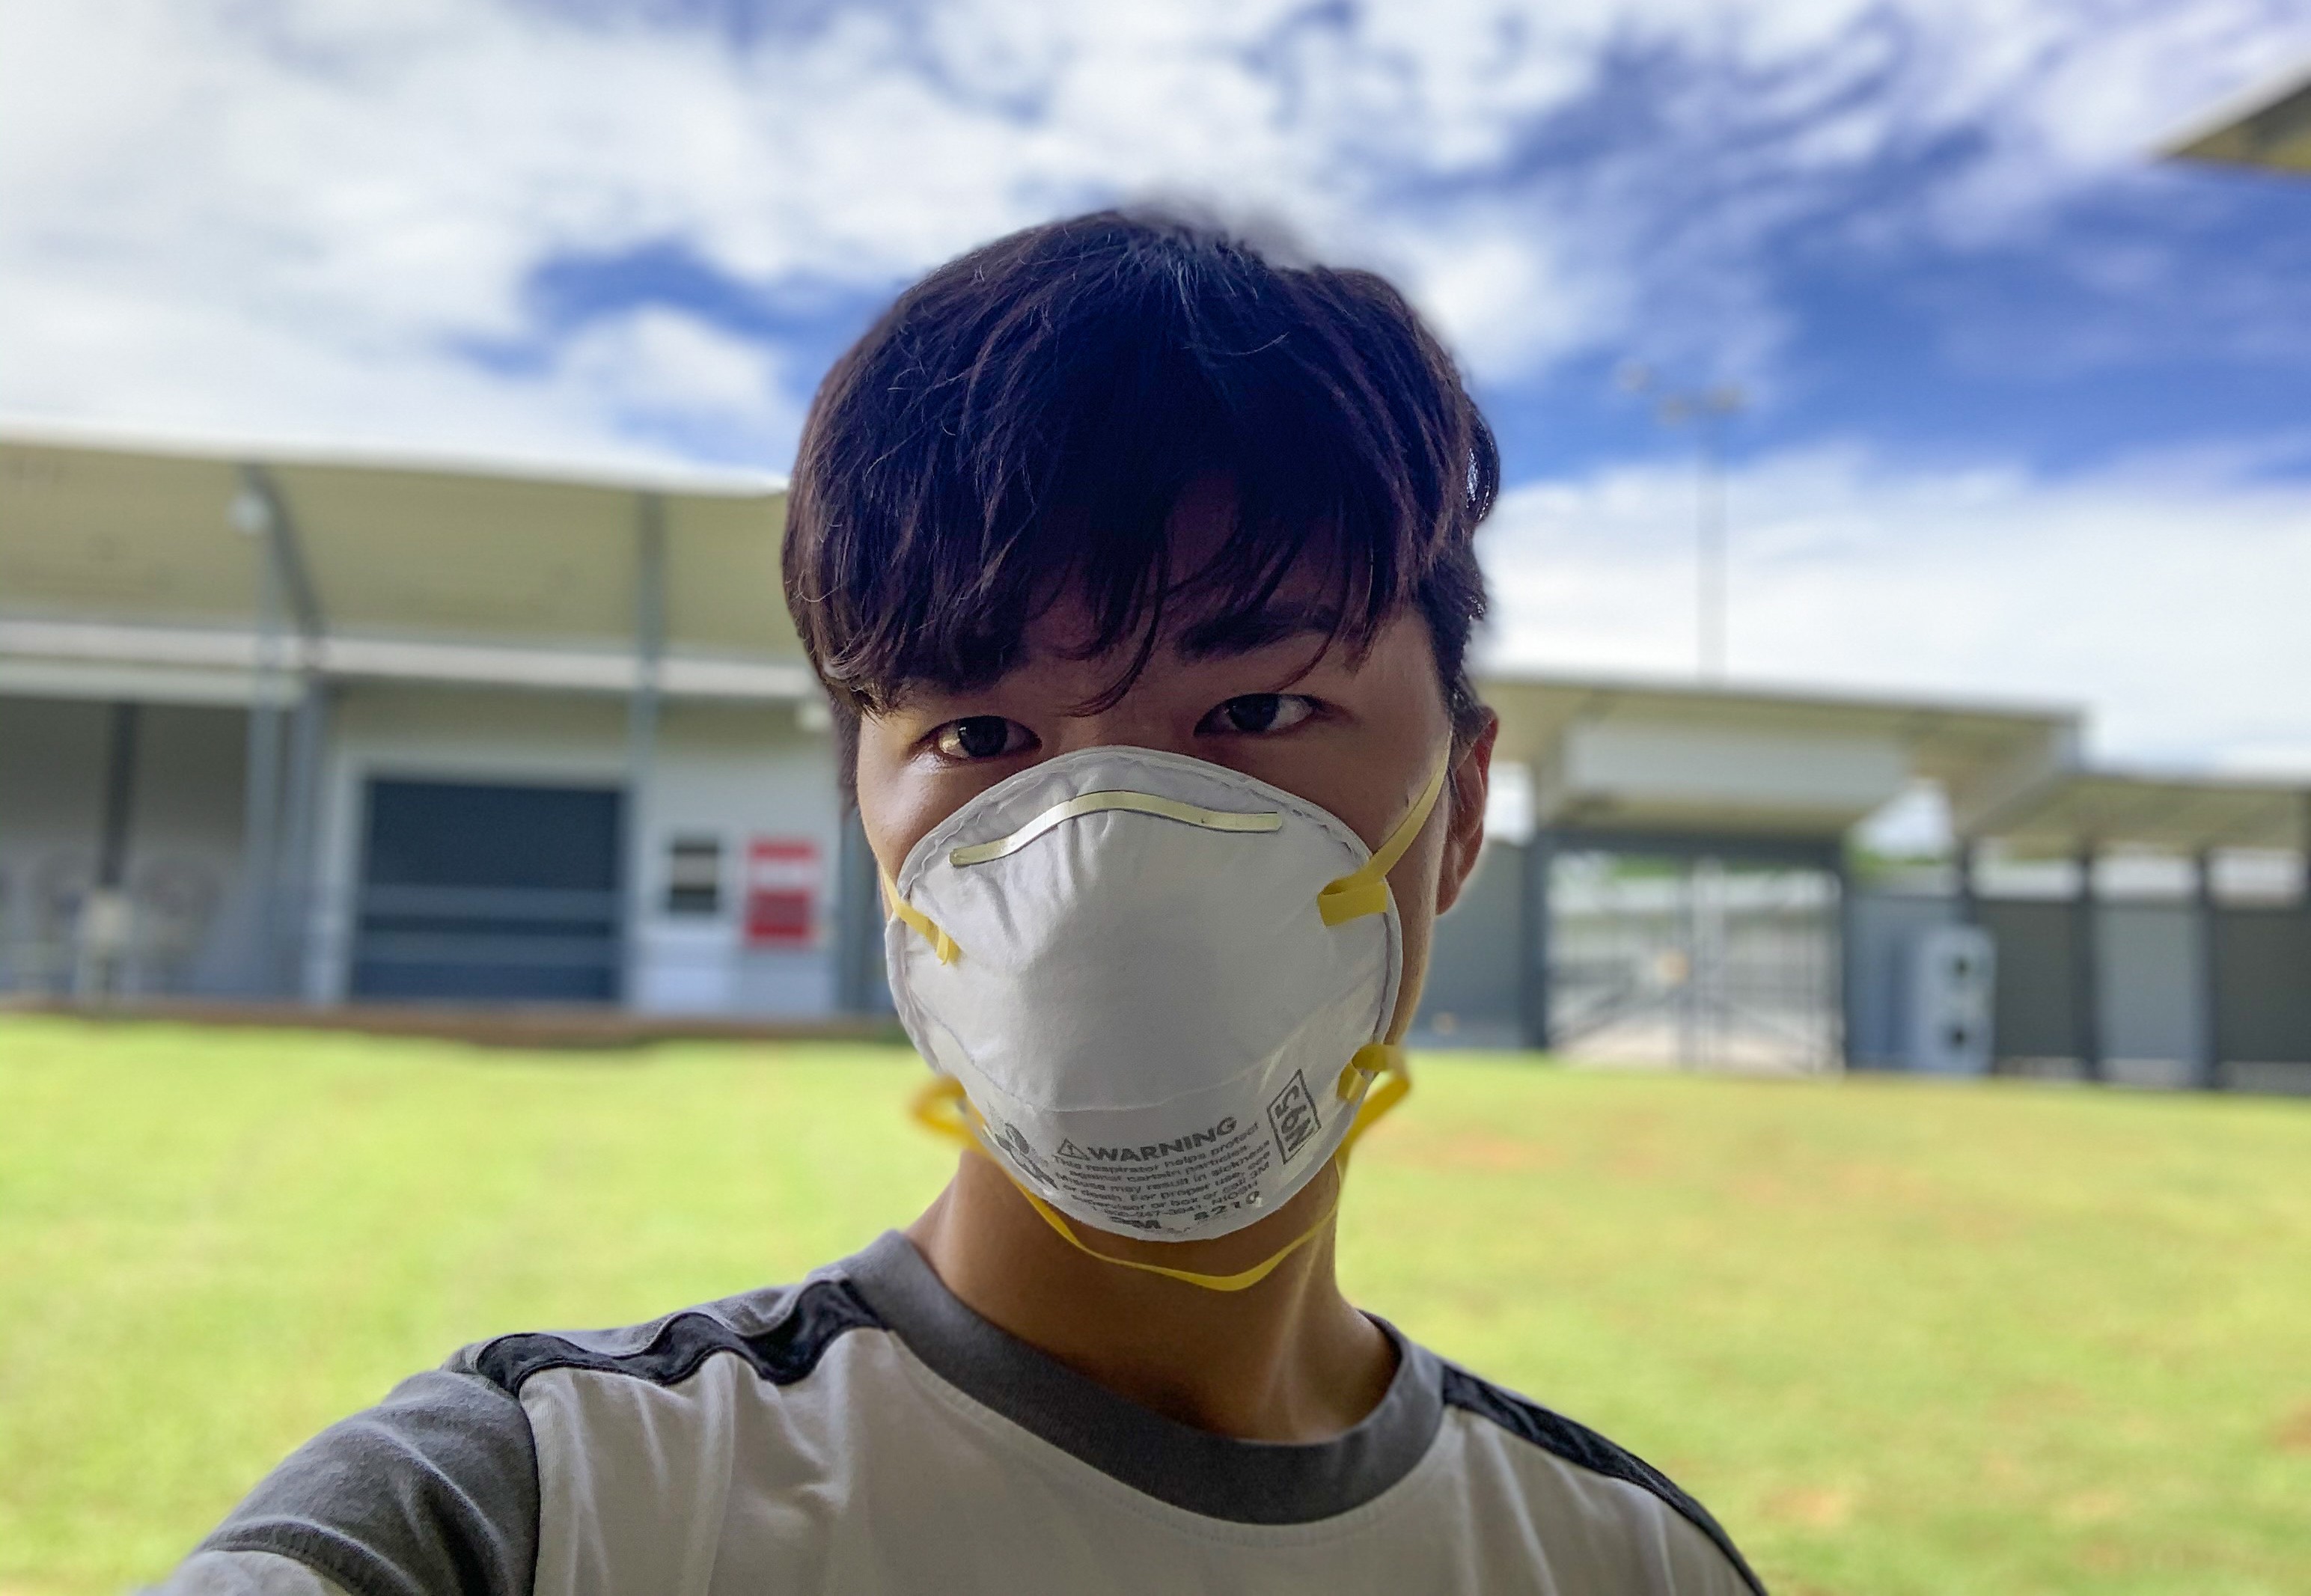 TikTok user Daniel Ou Yang at the quarantine facility on Christmas Island, Australia, on Monday. He will remain there for 14 days. Photo: Daniel Ou Yang